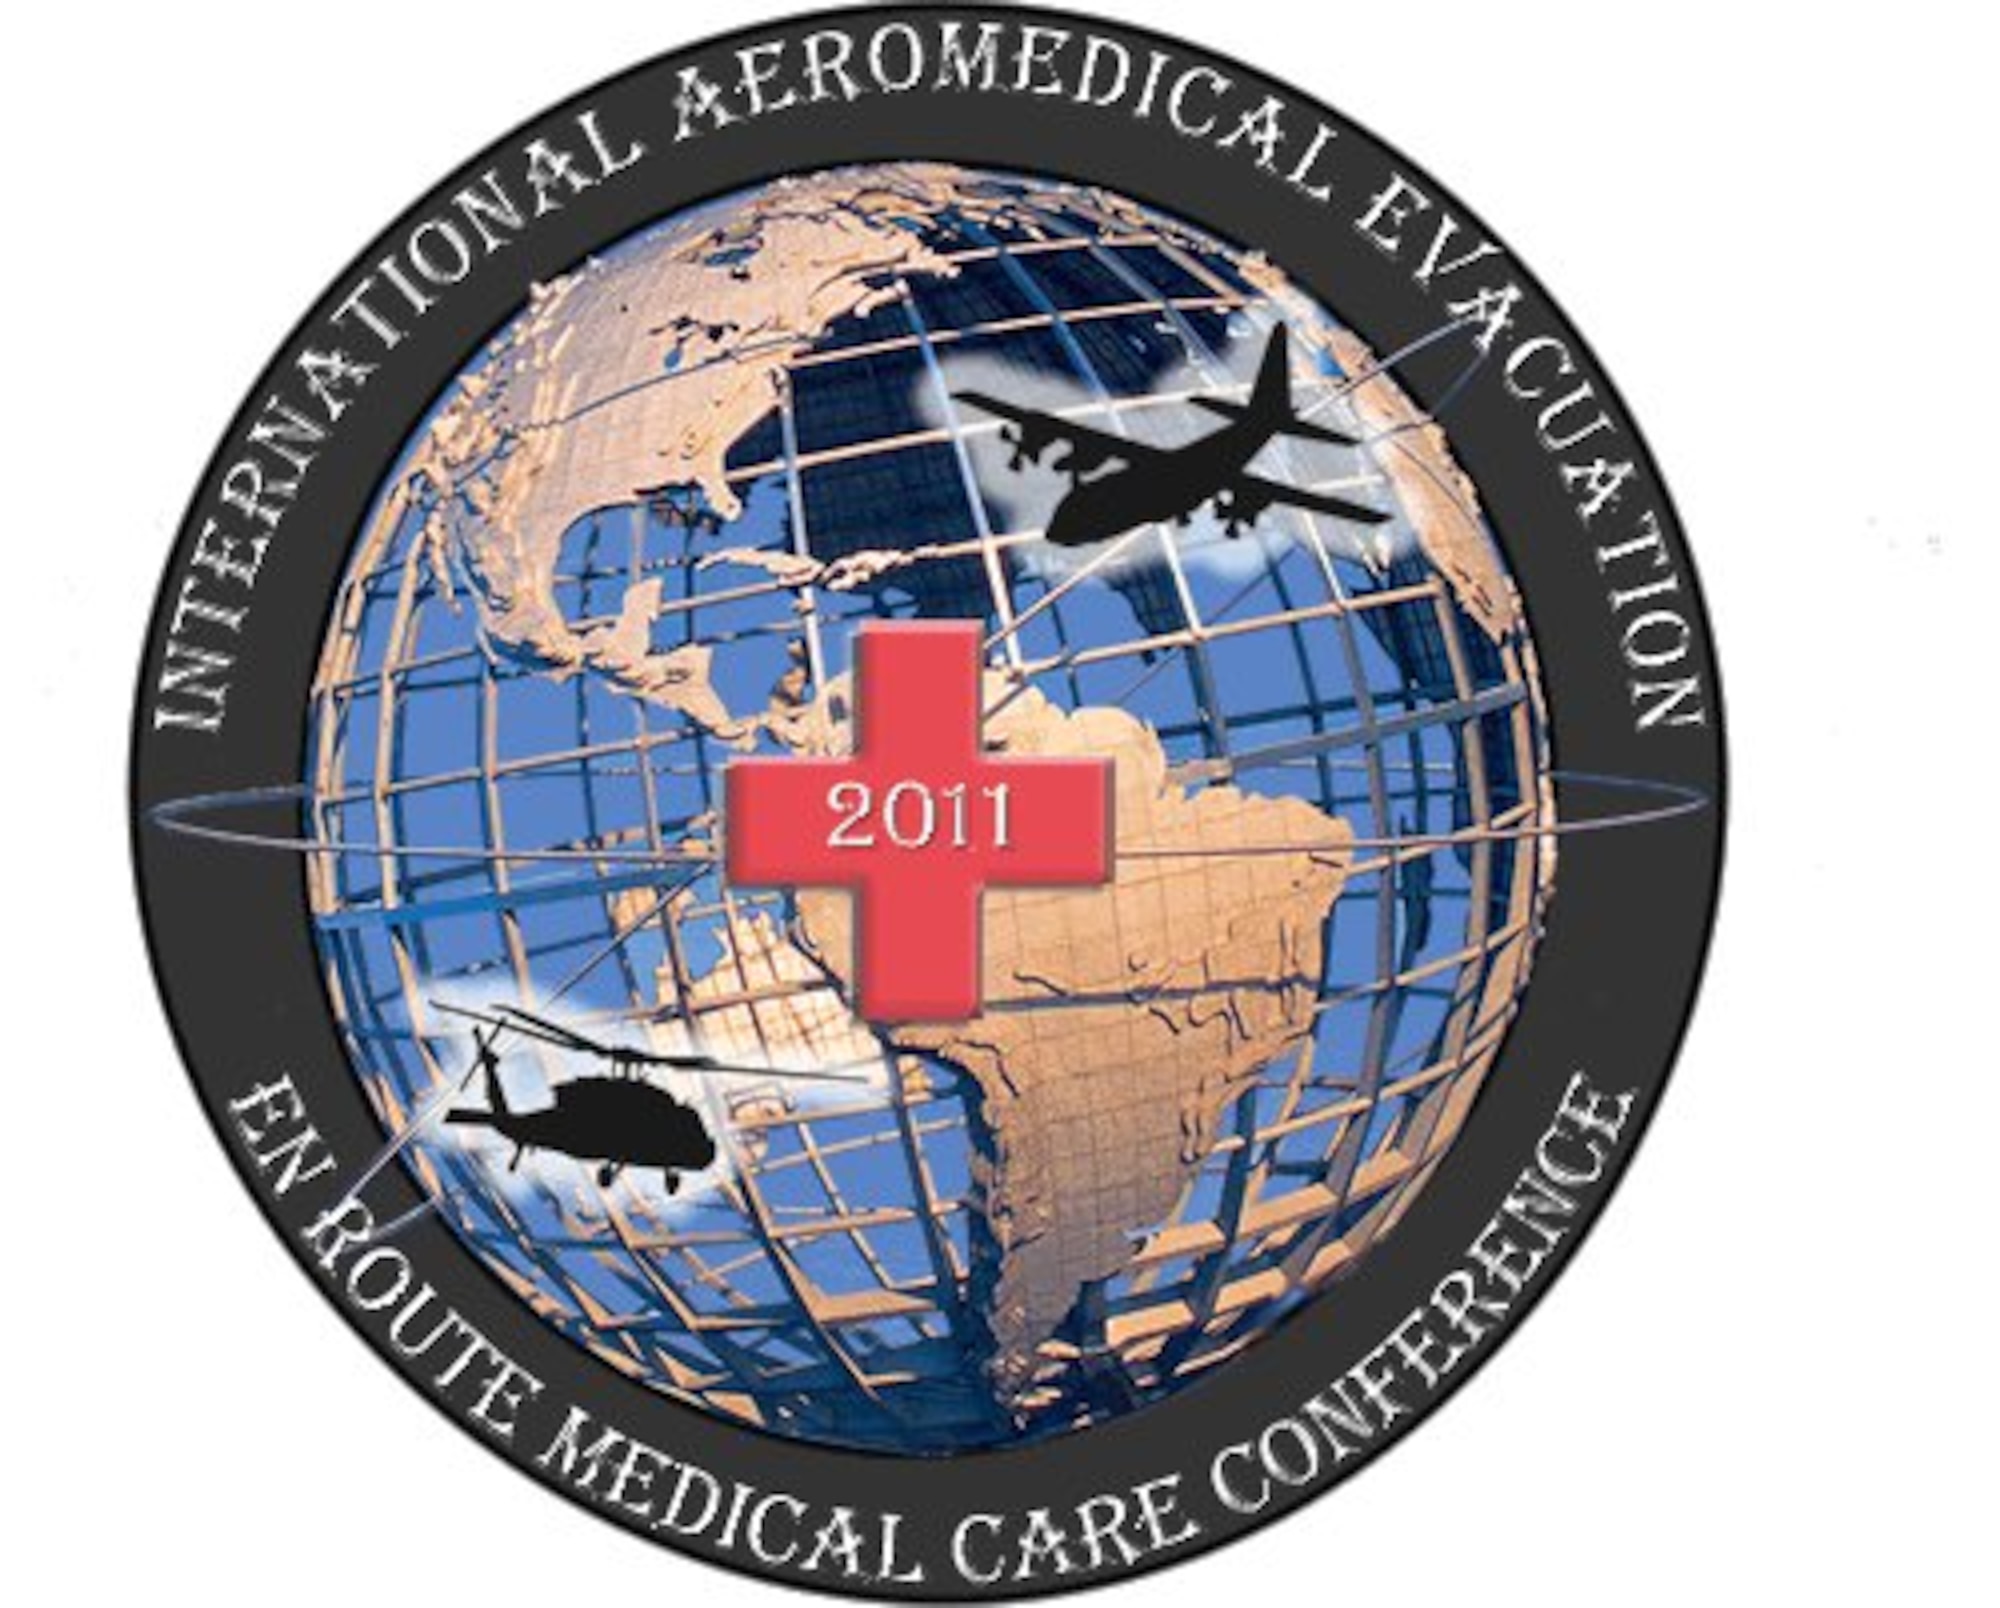 The 2011 International Aeromedical Evacuation/En Route Care Conference takes place at Joint Base Lewis-McChord, Wash., from July 20 to 21, 2011. (U.S. Air Force Graphic)